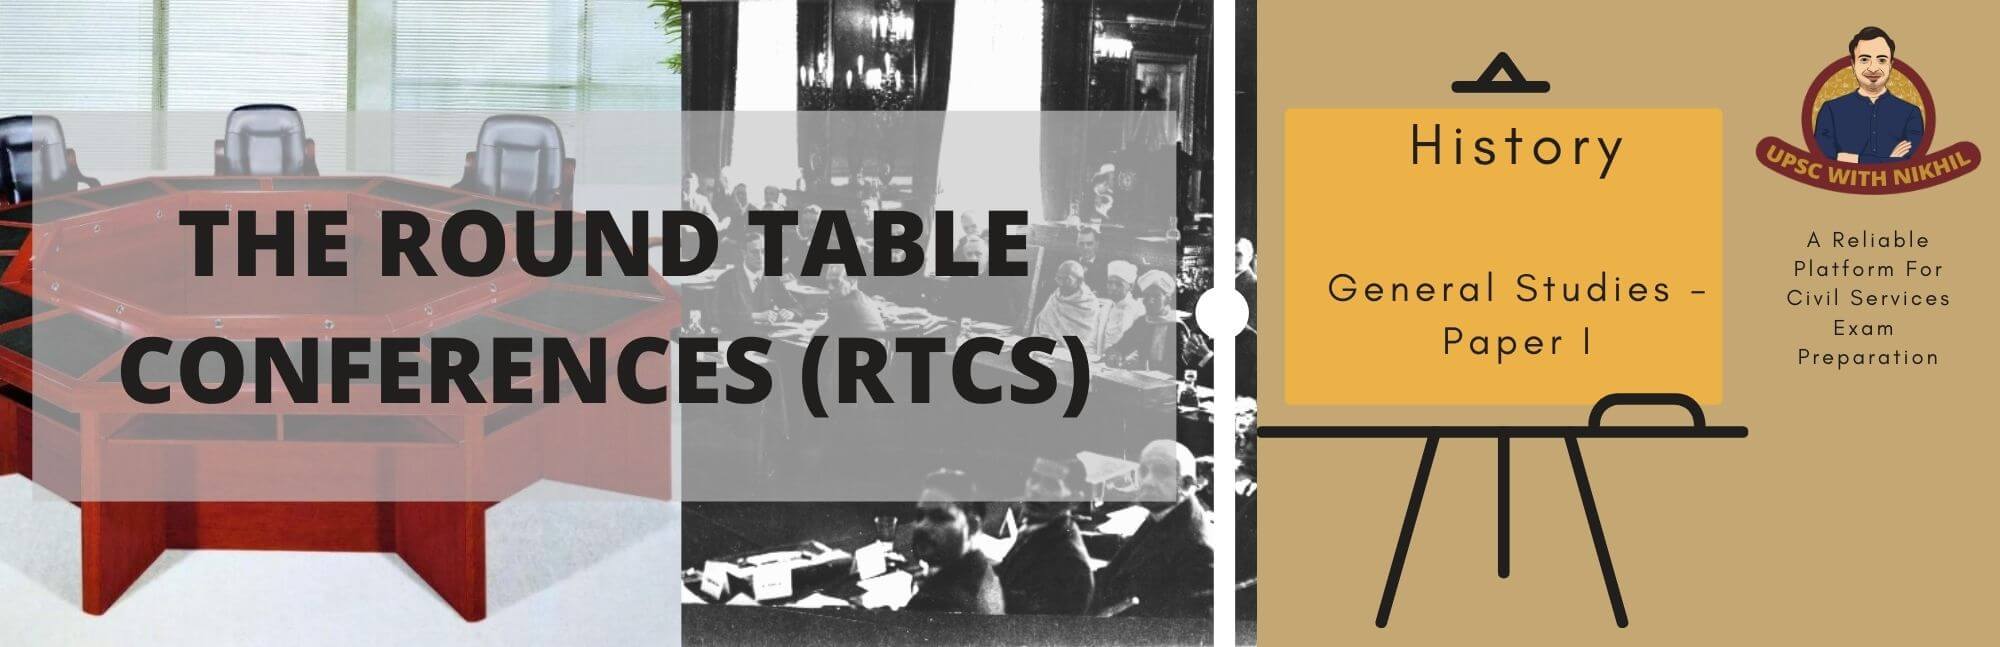 The Round Table Conferences Rtcs, Who Chaired The Second Round Table Conference